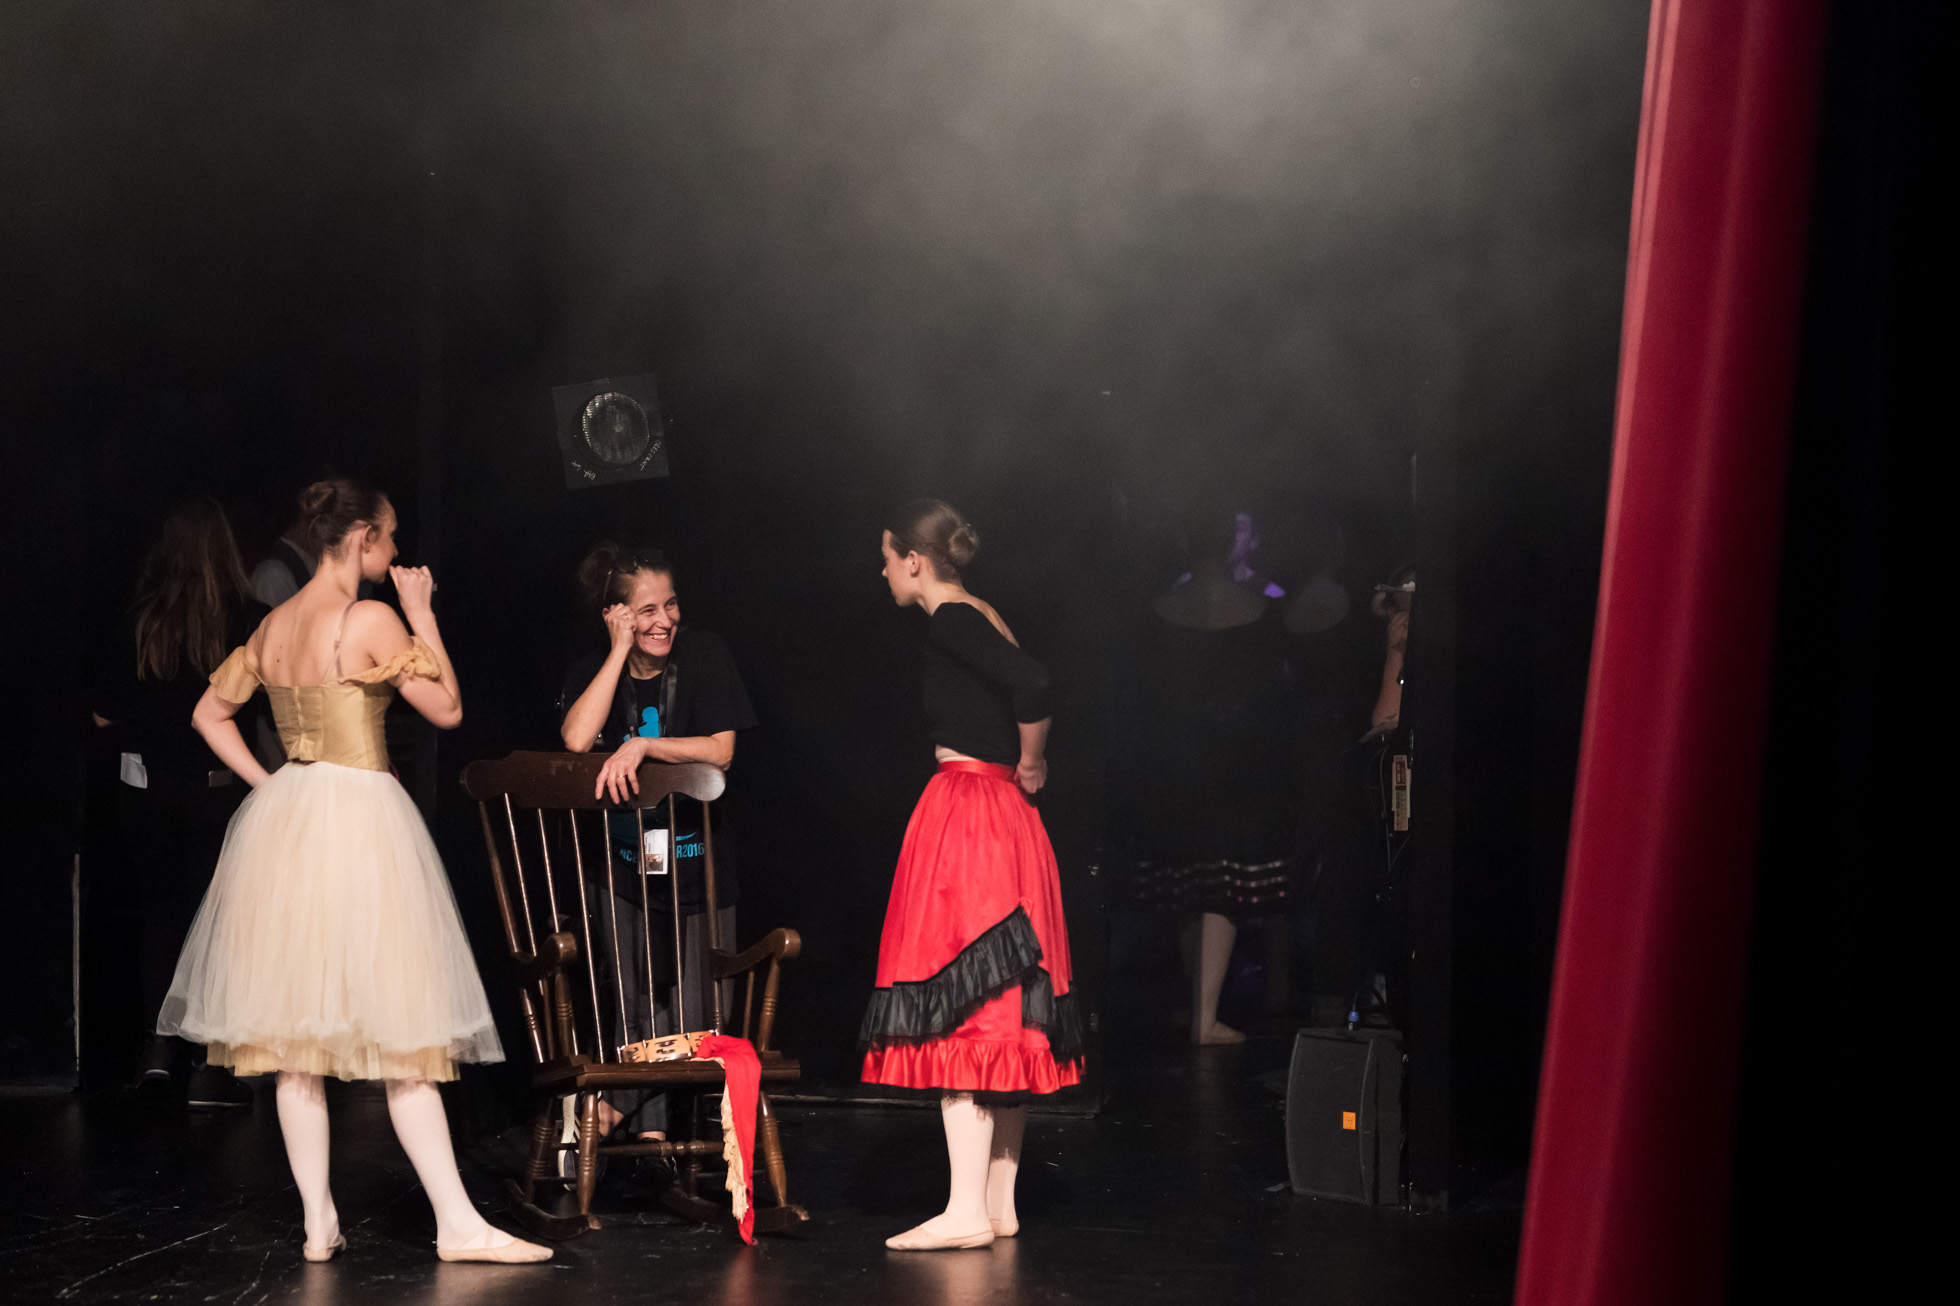 If you have the chance to get backstage at your child’s dance show or play, it’s the perfect opportunity to take your camera along and capture some memories from the behind the scenes.